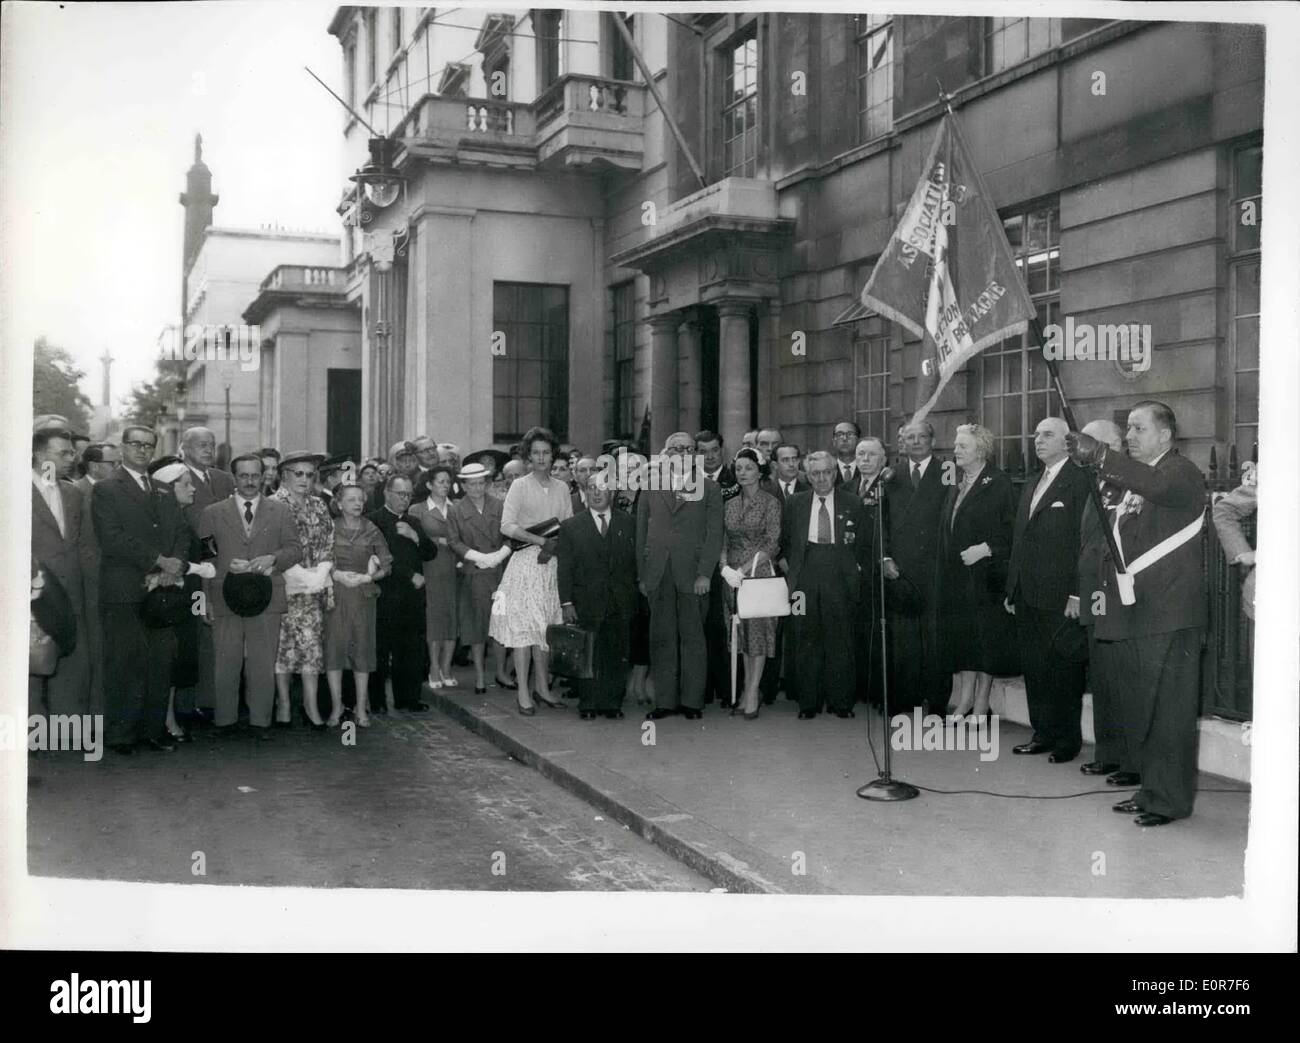 Jun. 18, 1958 - 18-6-58 Ceremony at General De Gaulle's war-time headquarters in London. The annual ceremony during which the small circle of French and English who worked closely with French Resistance, listened to General De Gaulle's broadcast of June 19, 1940, took place outside the General's war-time London headquarters in Carlton Gardens, this evening. Keystone Photo Shows: General view of the gathering, which included Lady Churchill, Mr. Selwyn Lloyd and the French Ambassador, M. Chauvel, listening to a recording of General de Gaulle's speech. Stock Photo